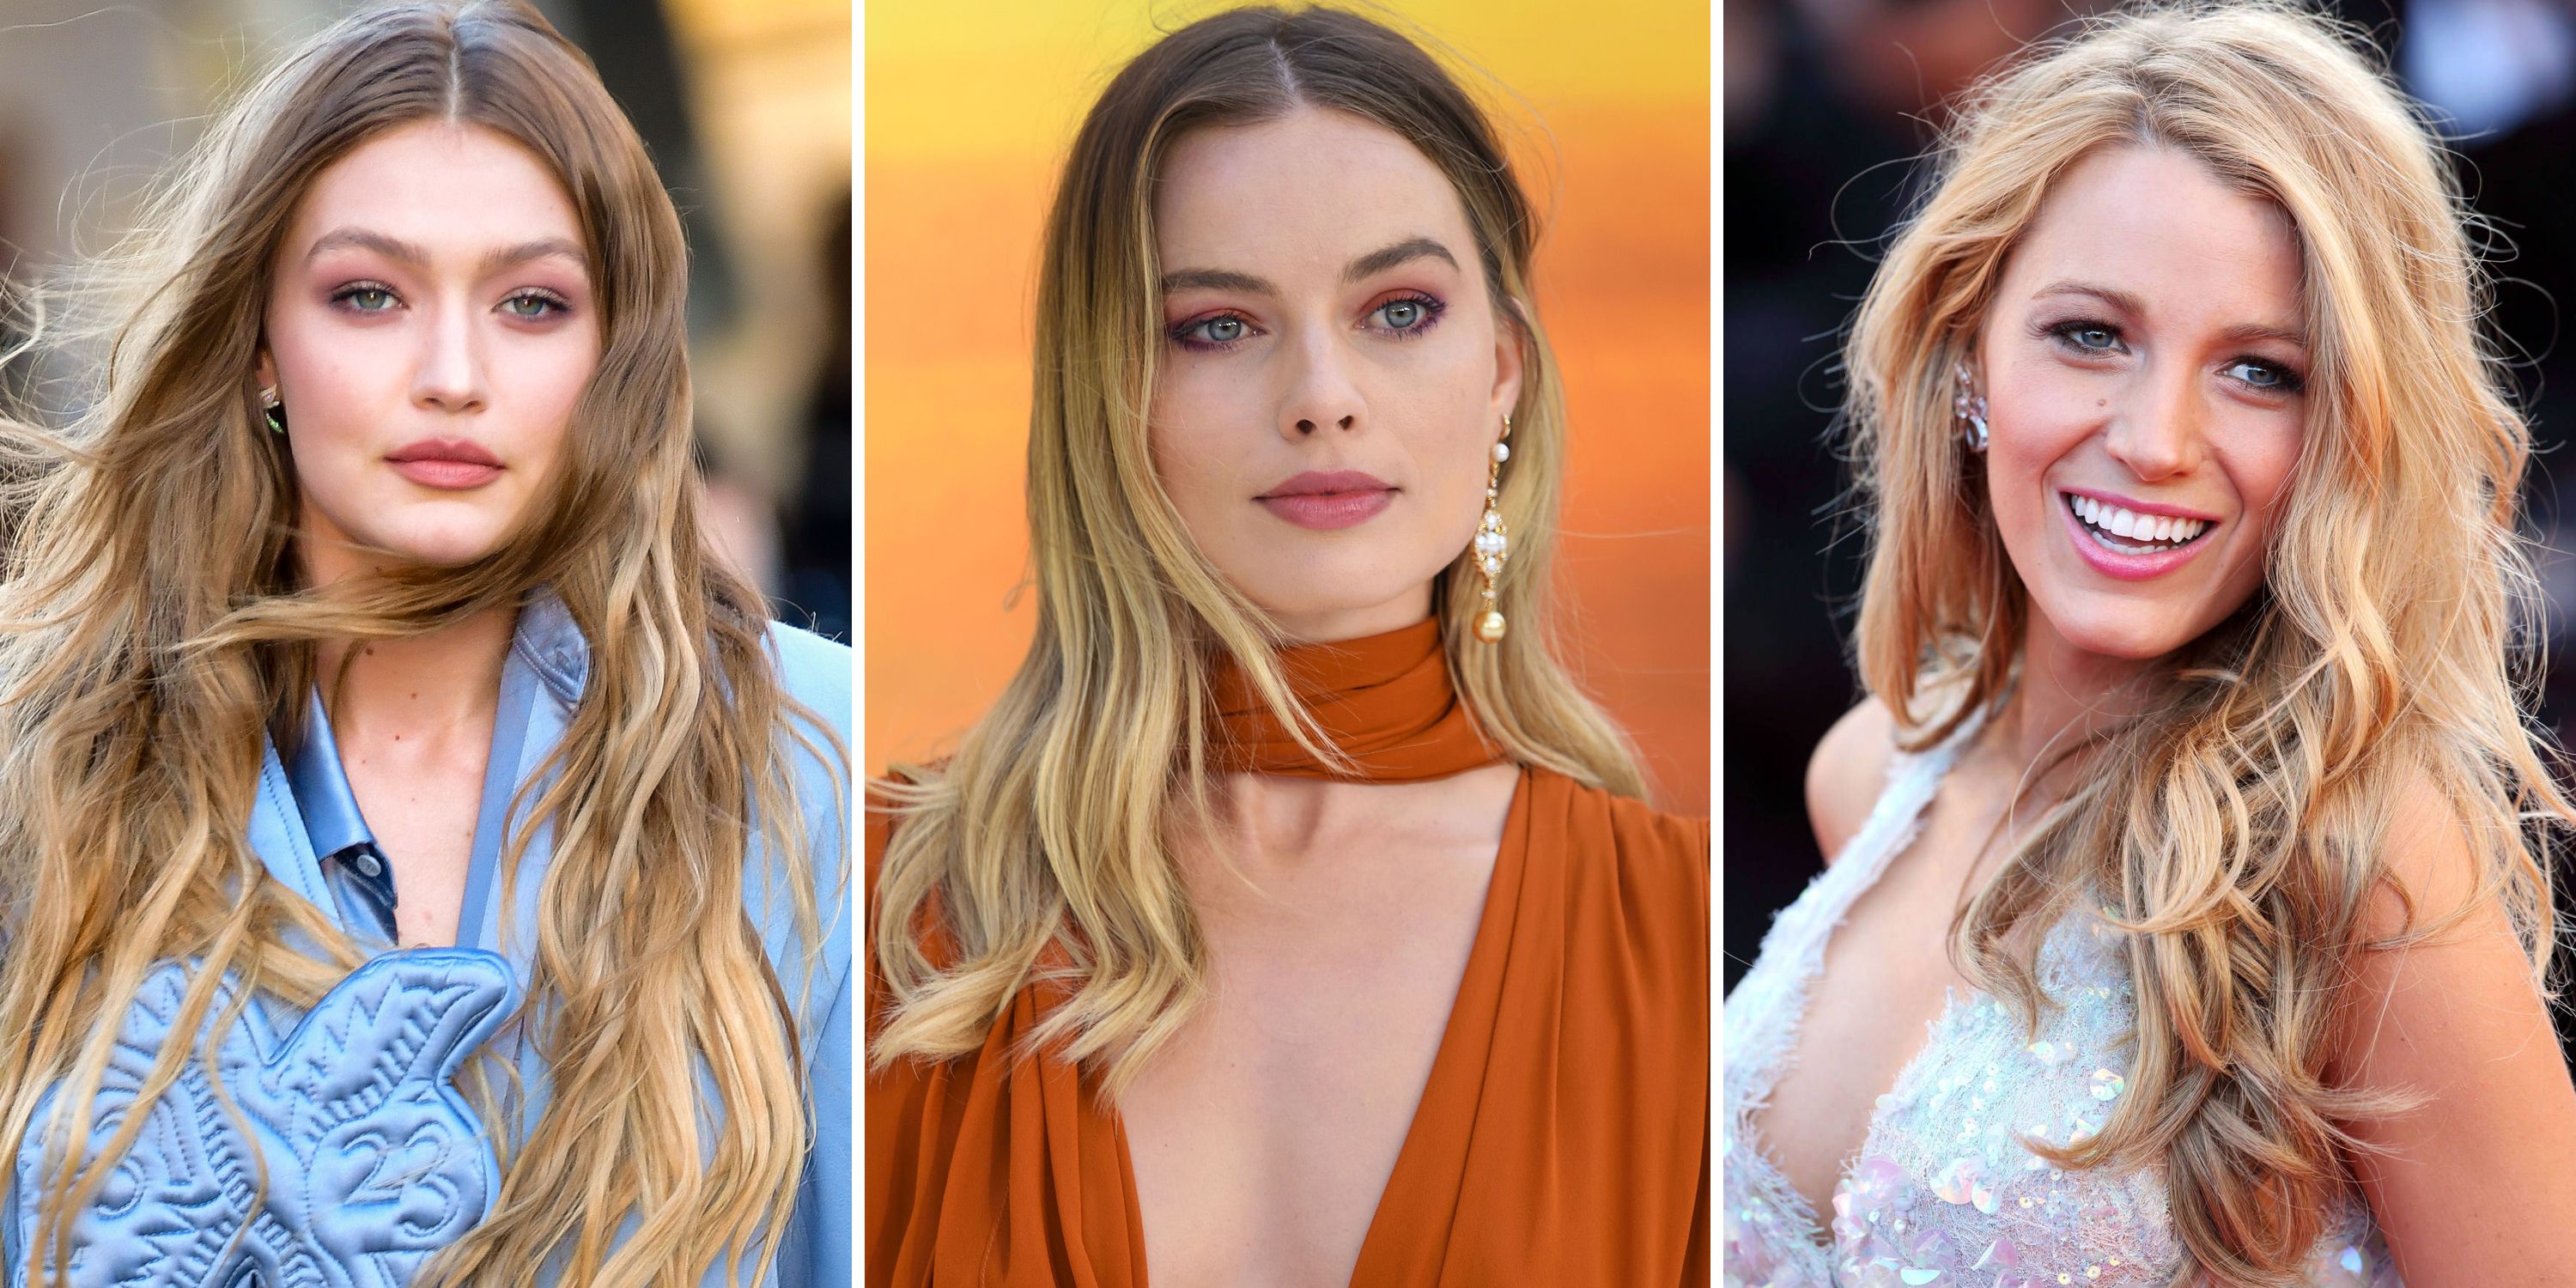 70 Stunning Hairstyles for Thin Hair—From Flippy Blowouts to Textured Lobs